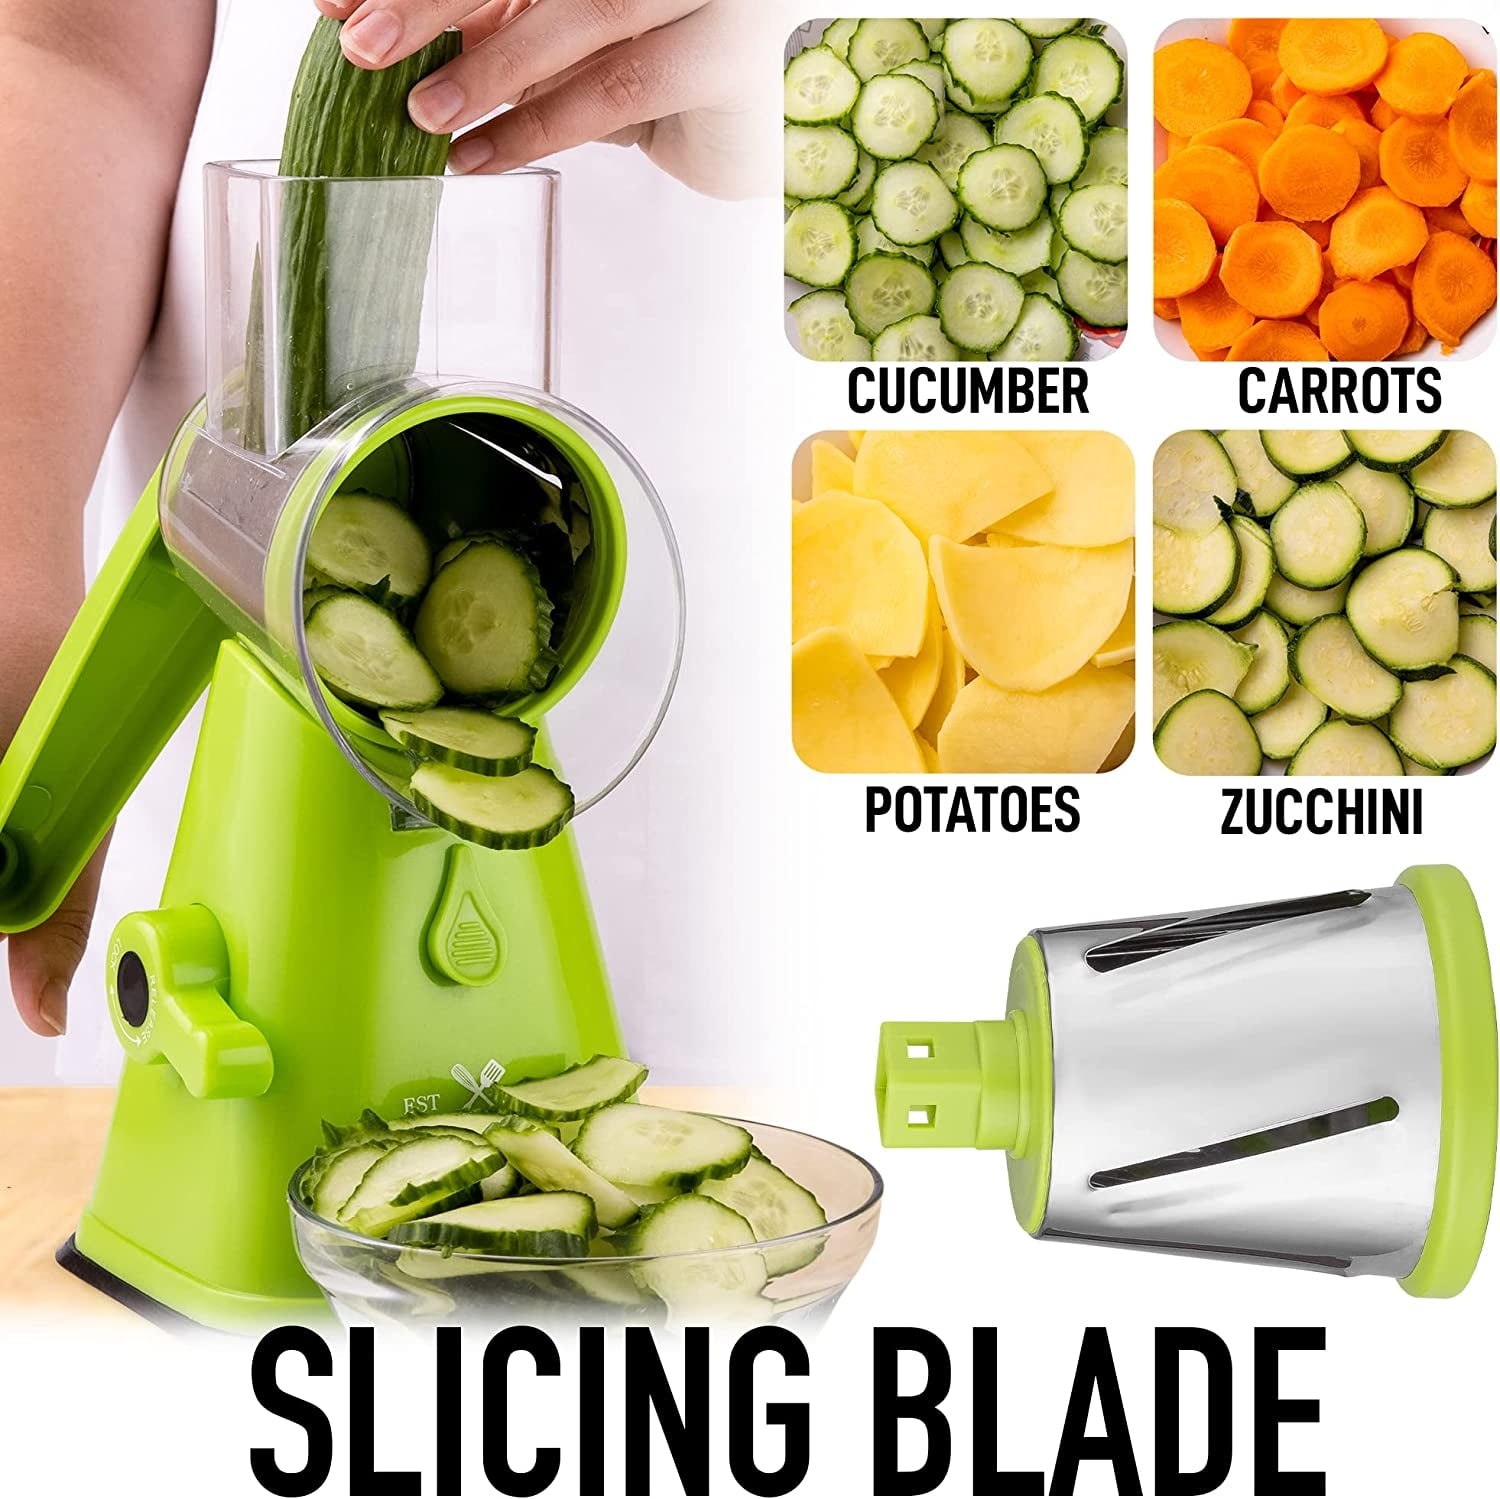 Zulay Kitchen Rotary Cheese Grater Cheese Shredder 3 Replaceable Stainless  Steel Blades Light Green 